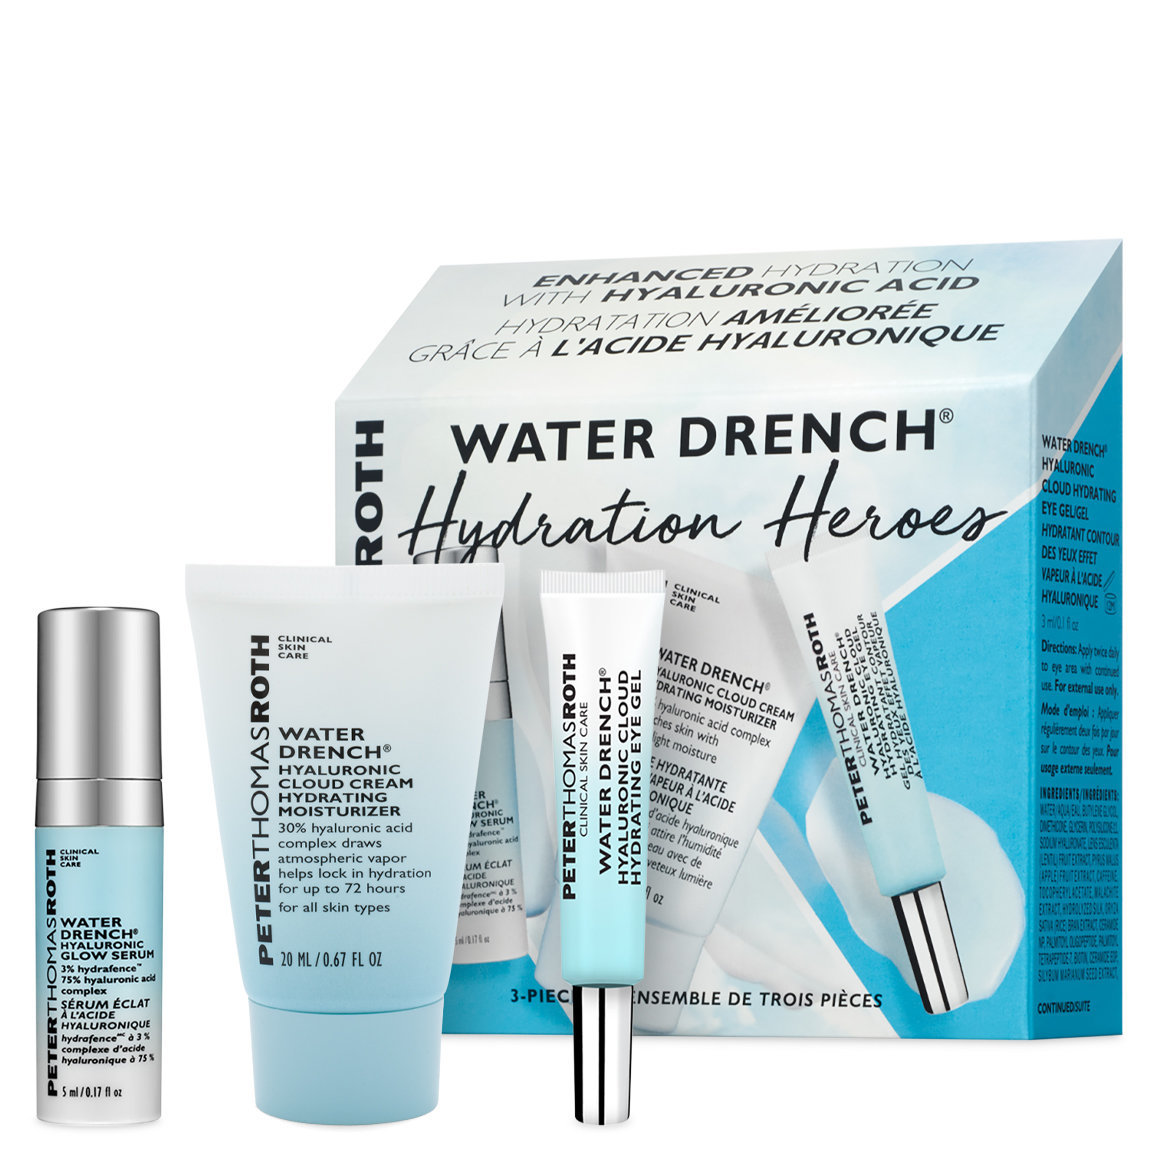 Peter Thomas Roth Water Drench Hydration Heroes alternative view 1 - product swatch.